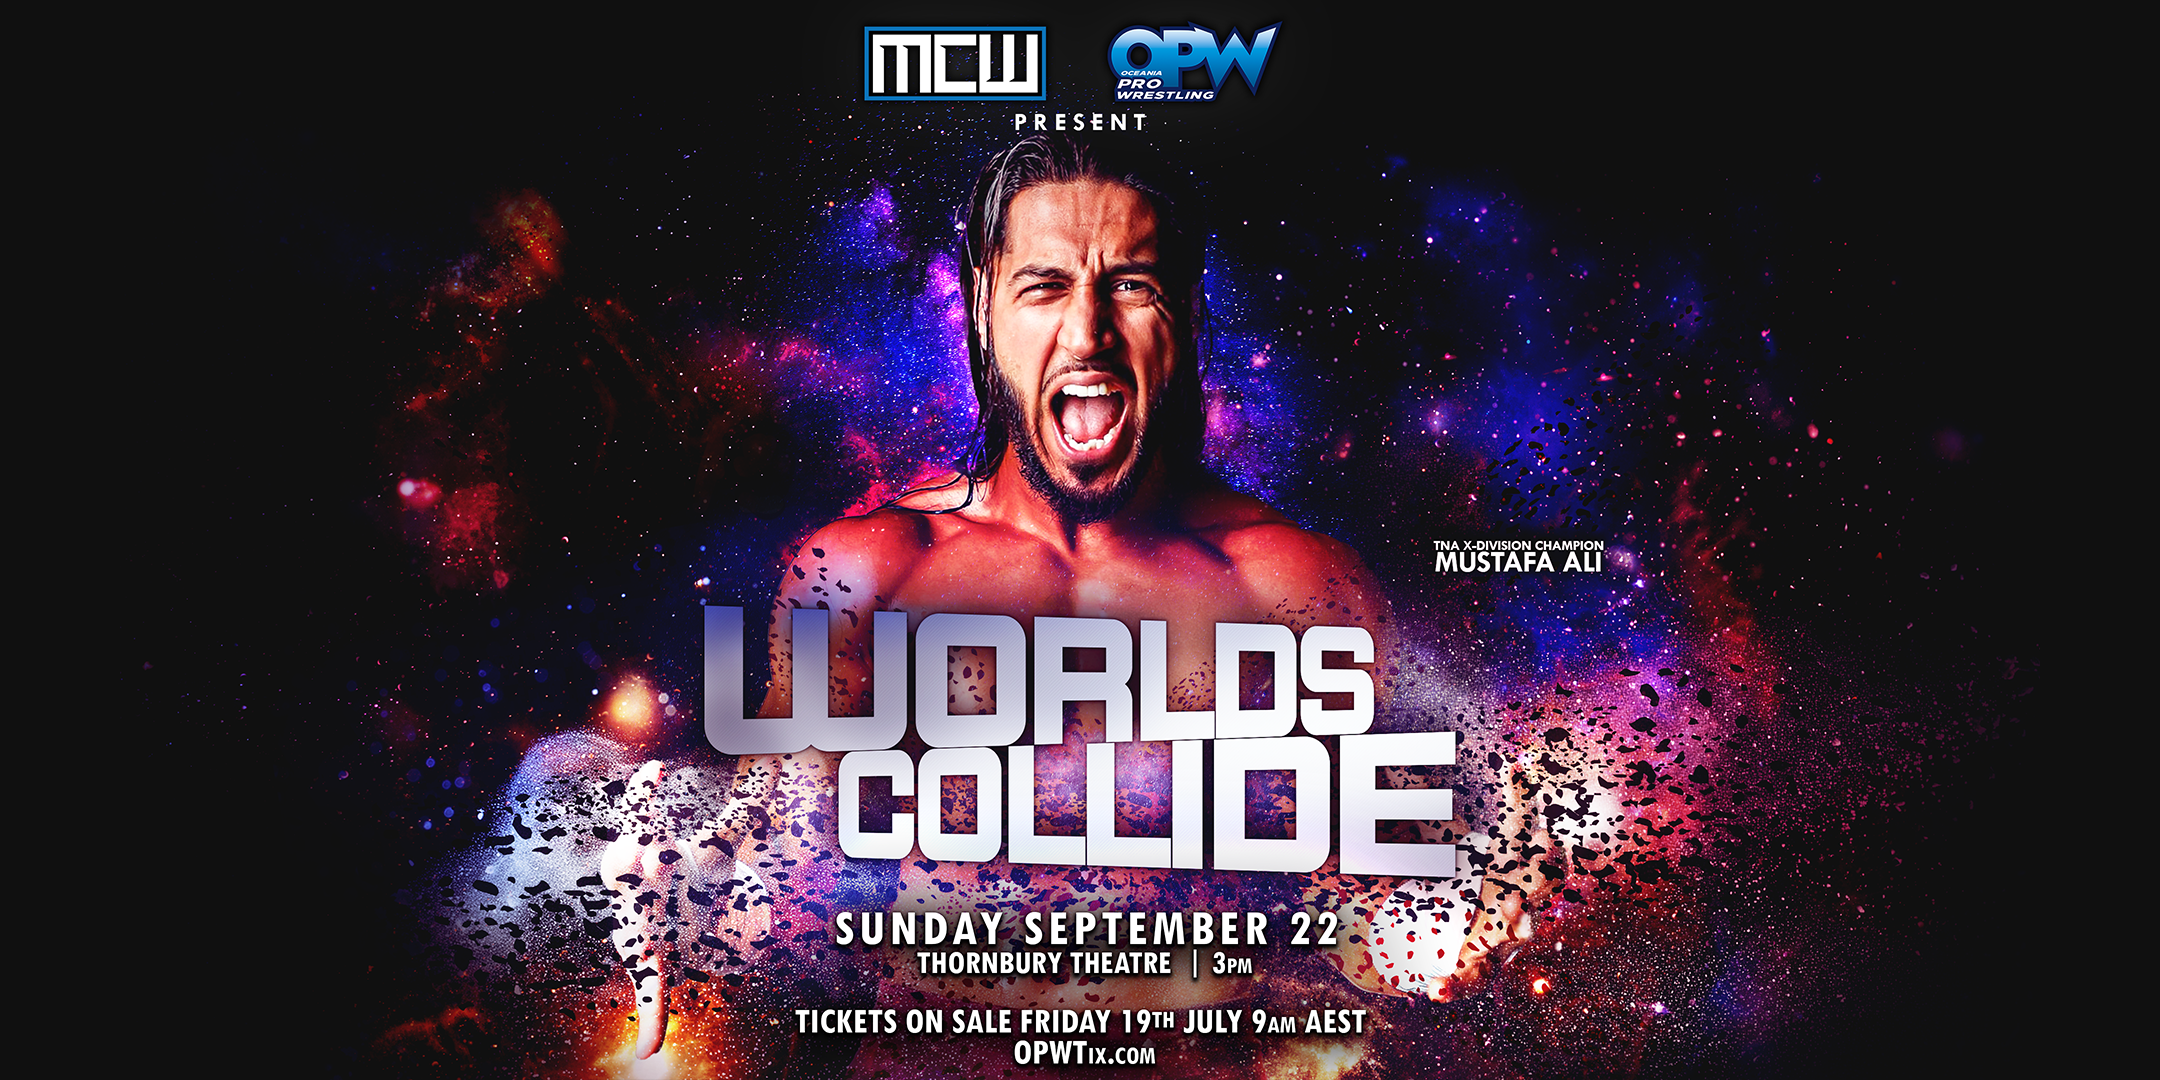 OPW and MCW set for a collision course